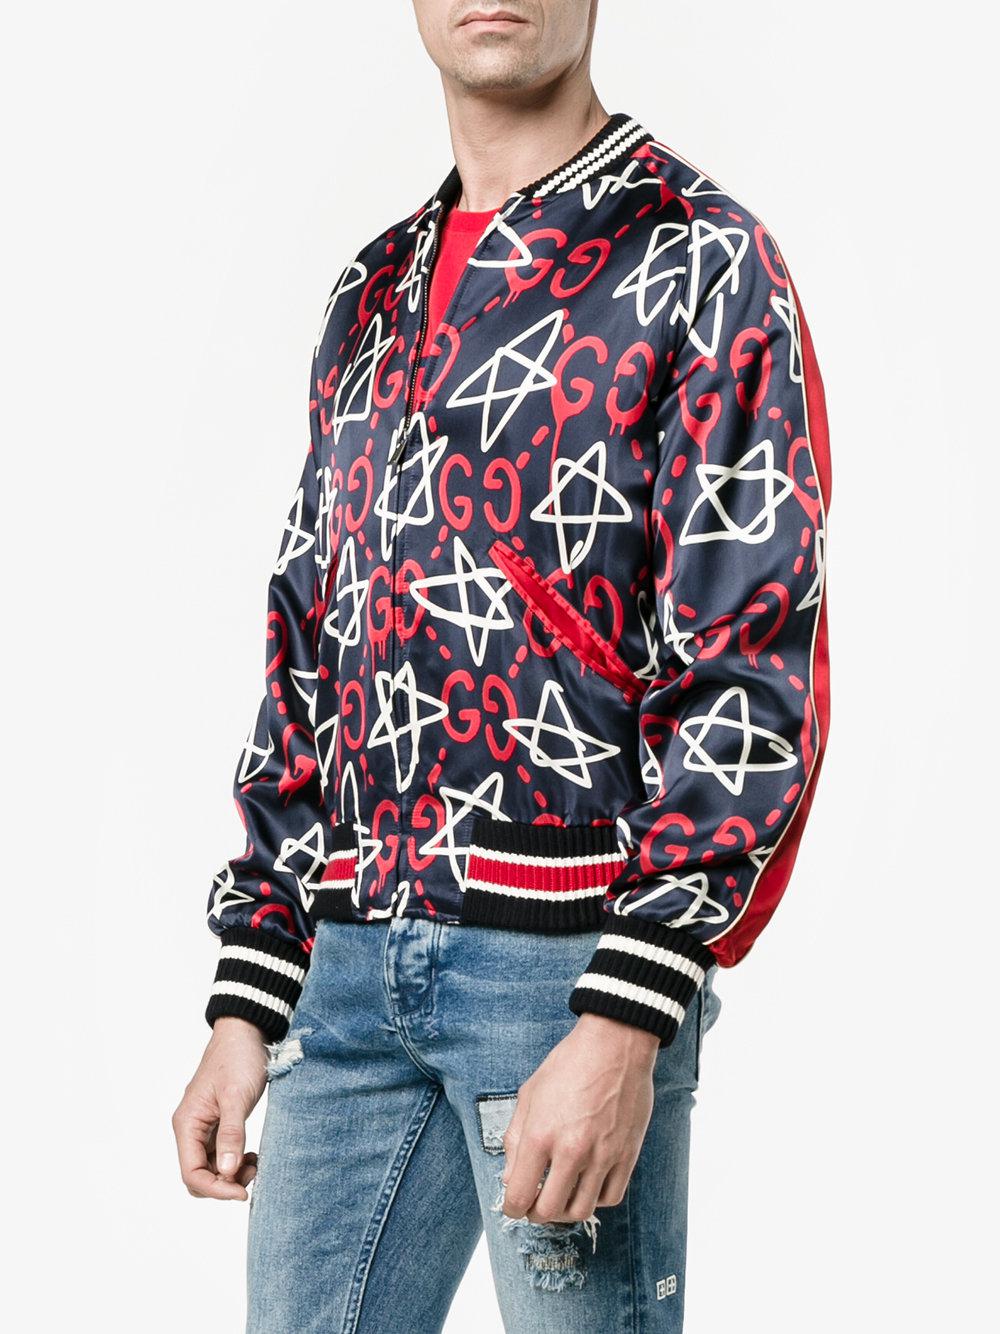 Gucci Synthetic Ghost Star Duchesse Bomber Jacket in Blue for Men - Lyst